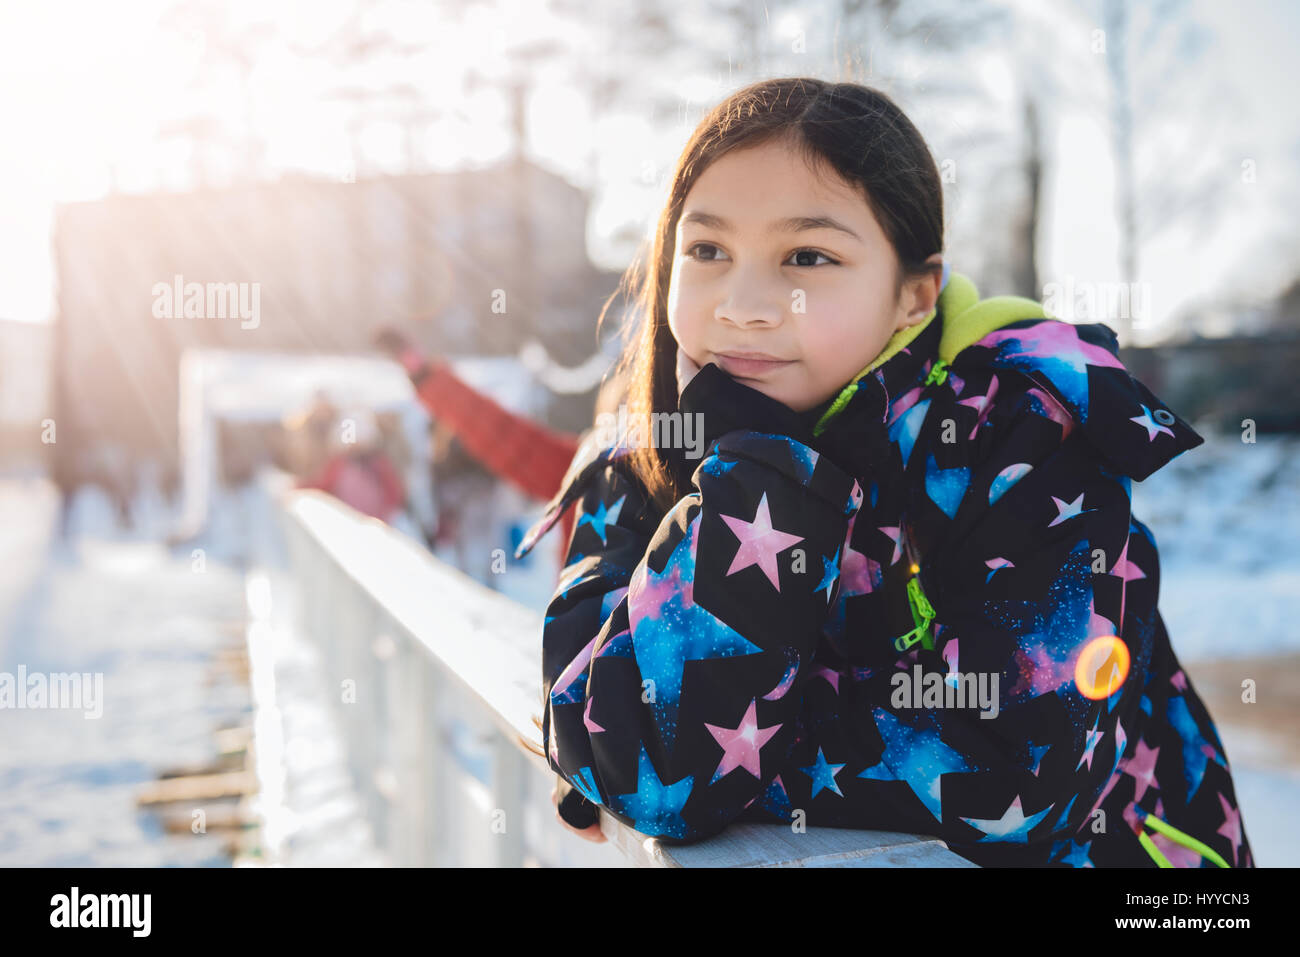 Girls resting outdoor on ice rink Stock Photo